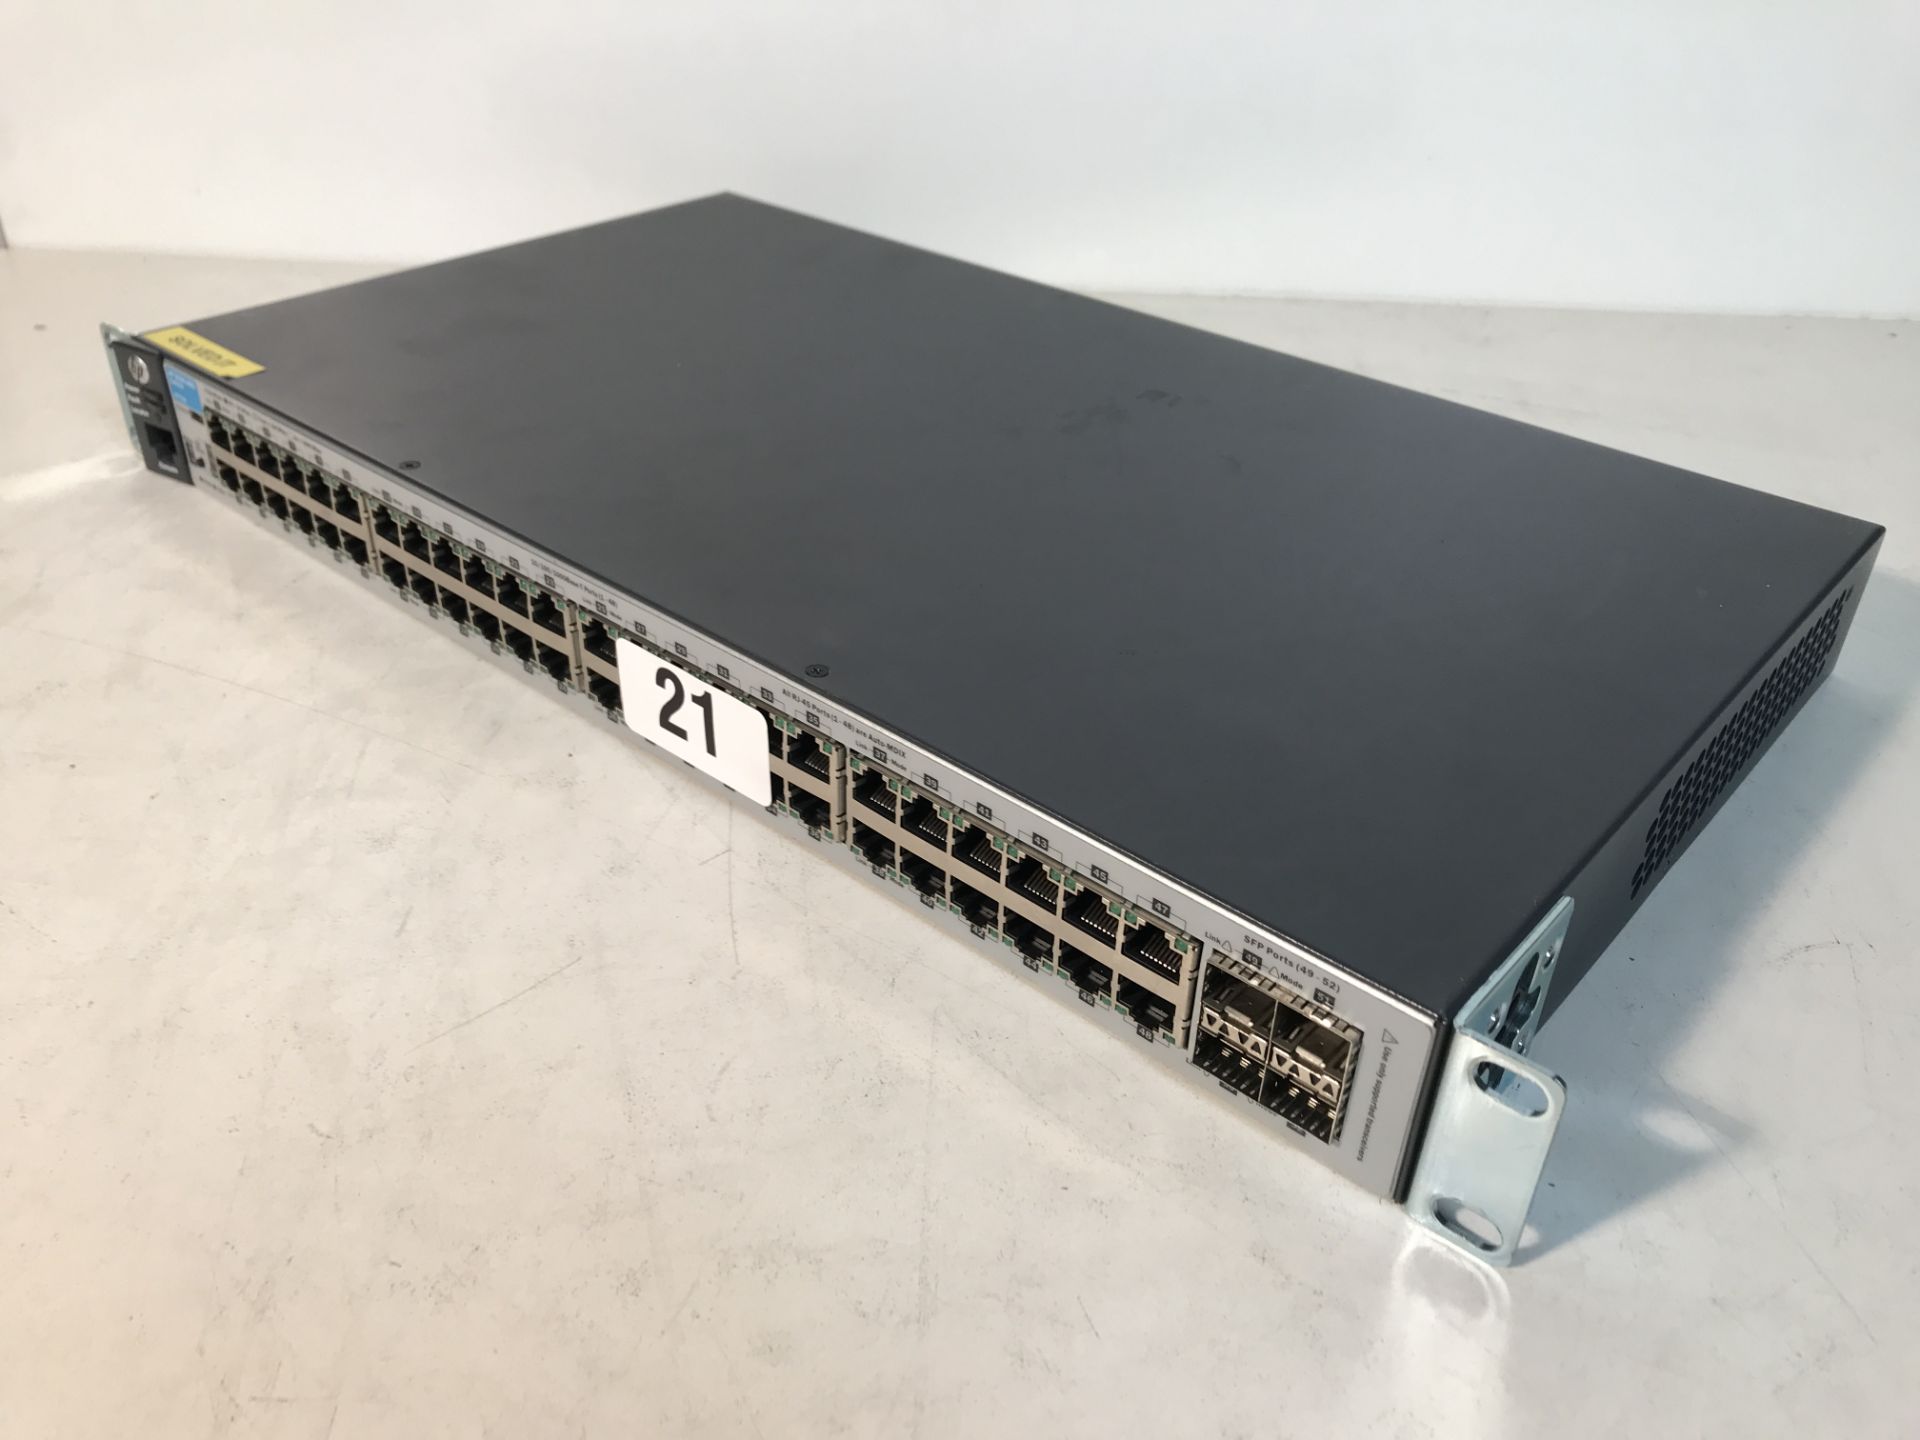 HP Innovation ProCurve Networking 48 Port Switch - Image 2 of 4